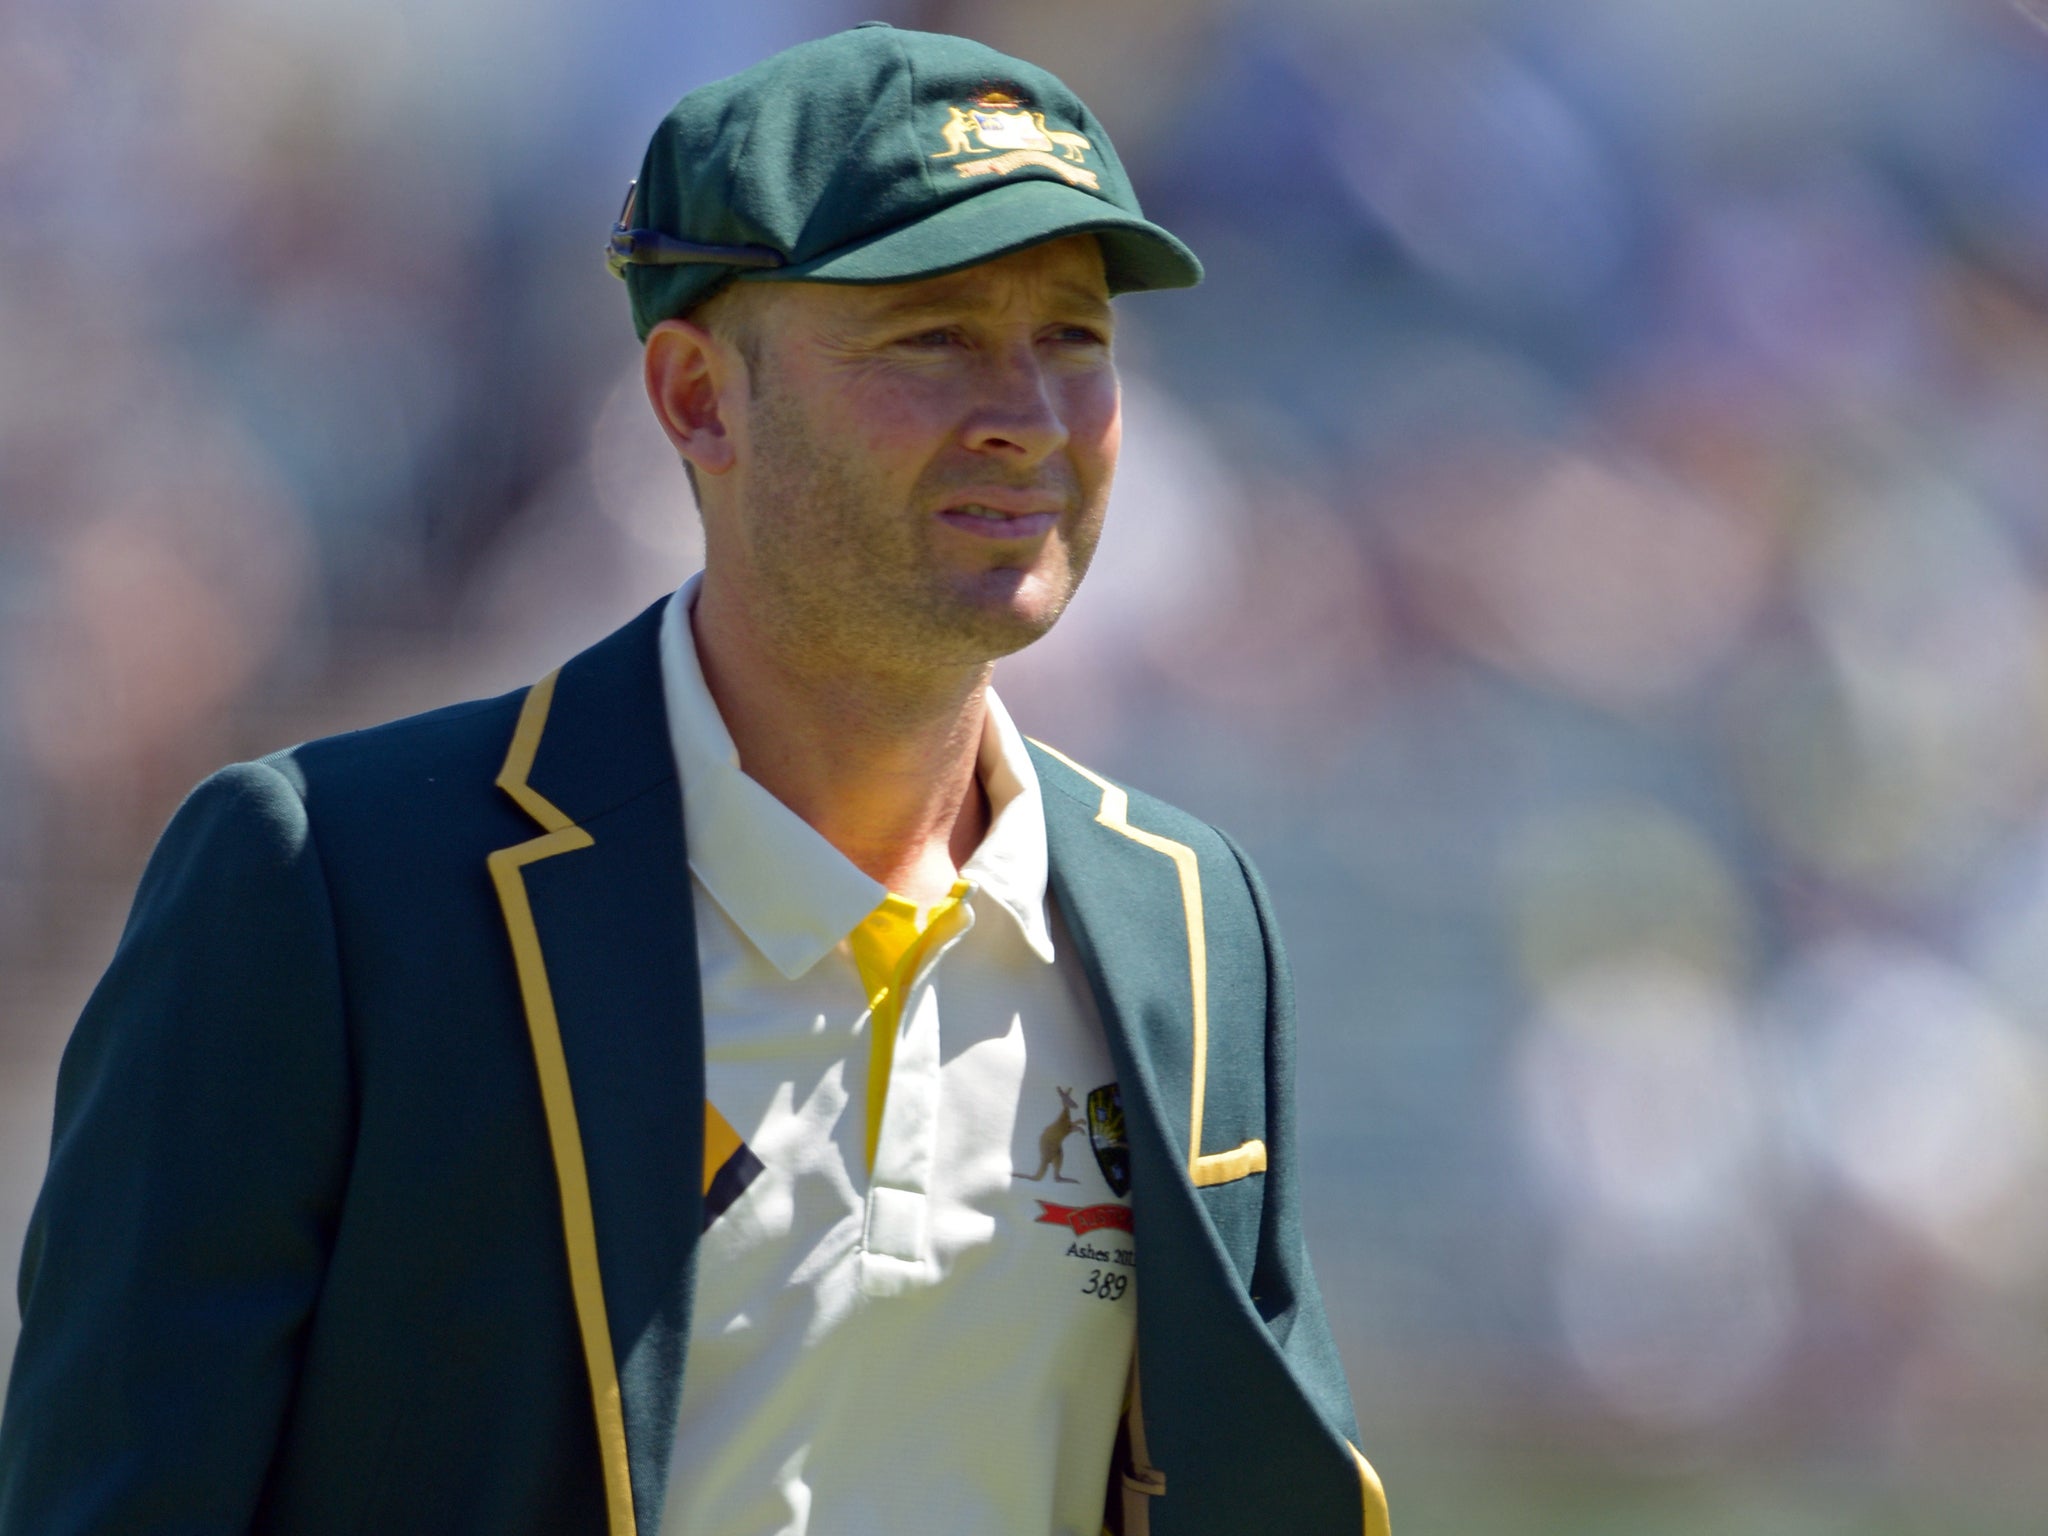 Australia captain Michael Clarke has been named the player and test cricketer of the year by the ICC